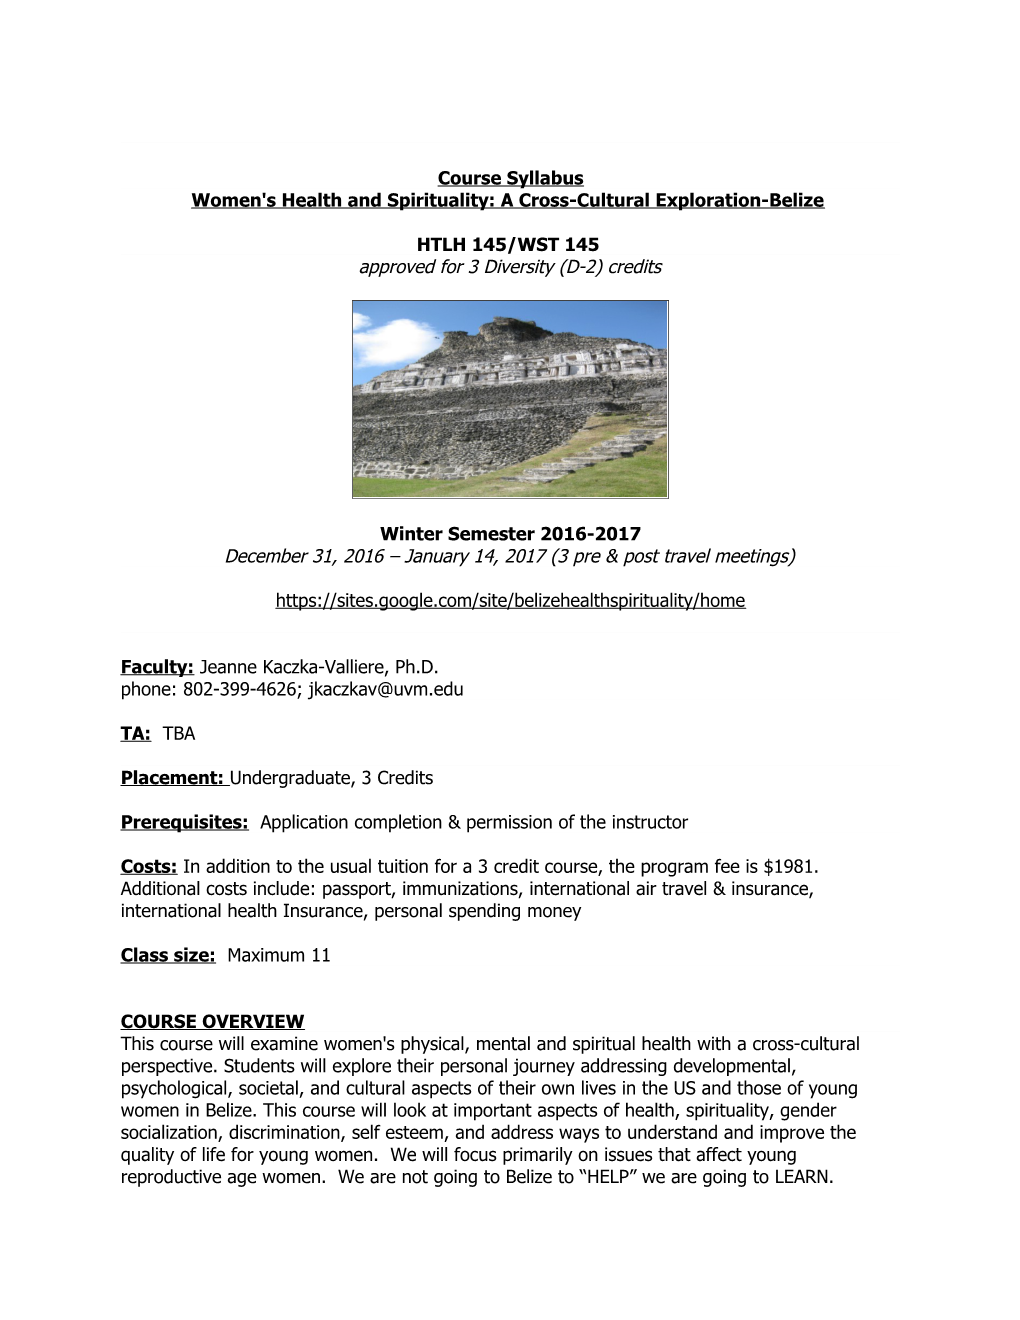 Women's Health and Spirituality: a Cross-Cultural Exploration-Belize